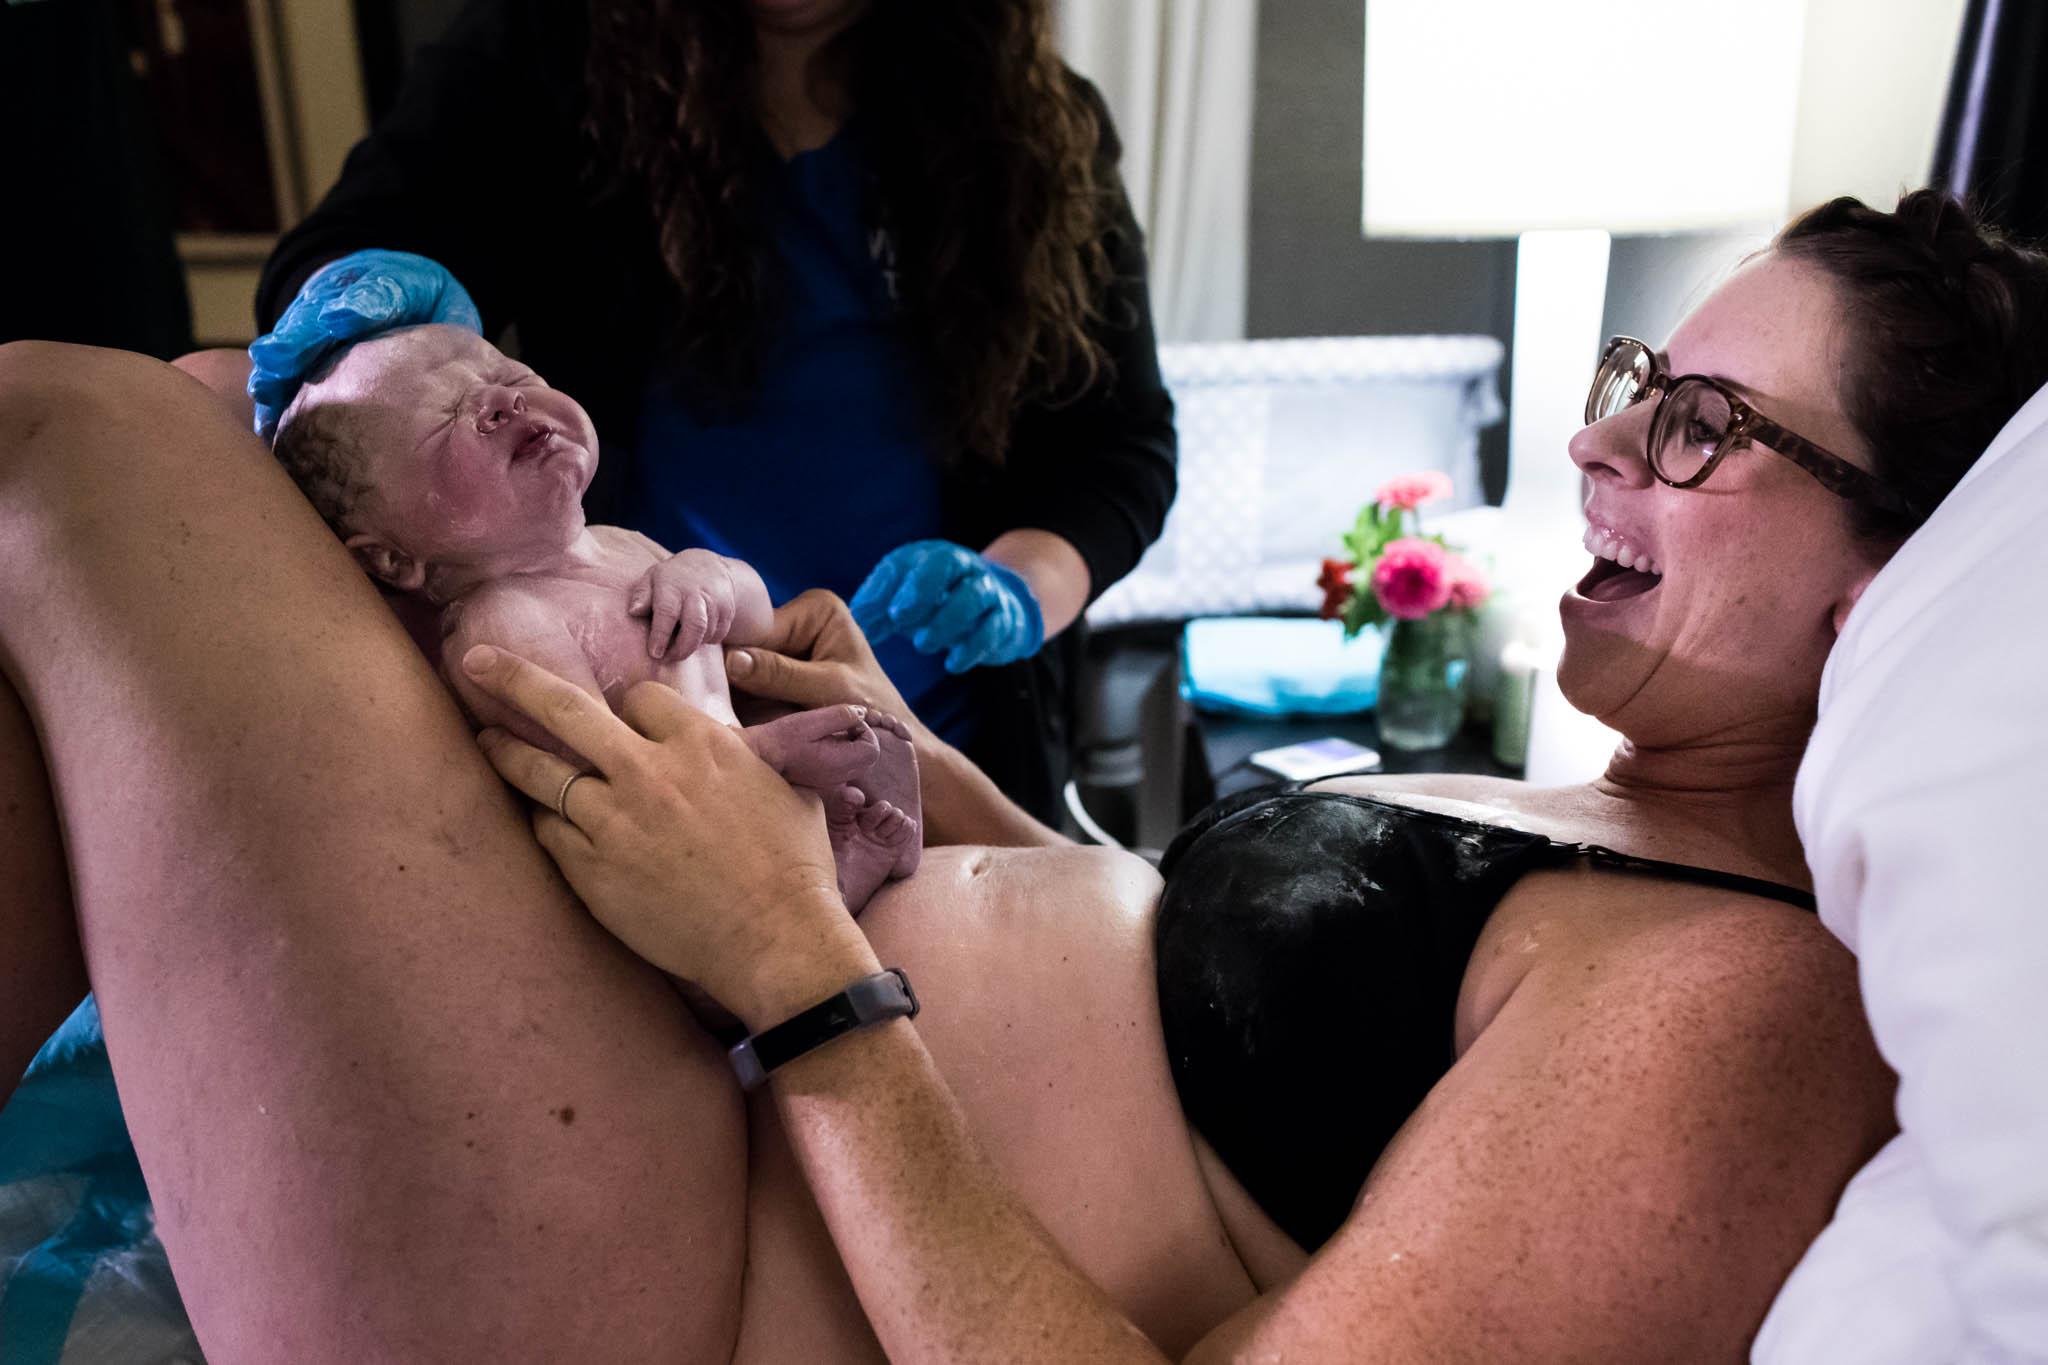 Denton Birth Photographer Lawren Rose Photography captures the moment a Mom gets to lay eyes on her new baby boy for the first time